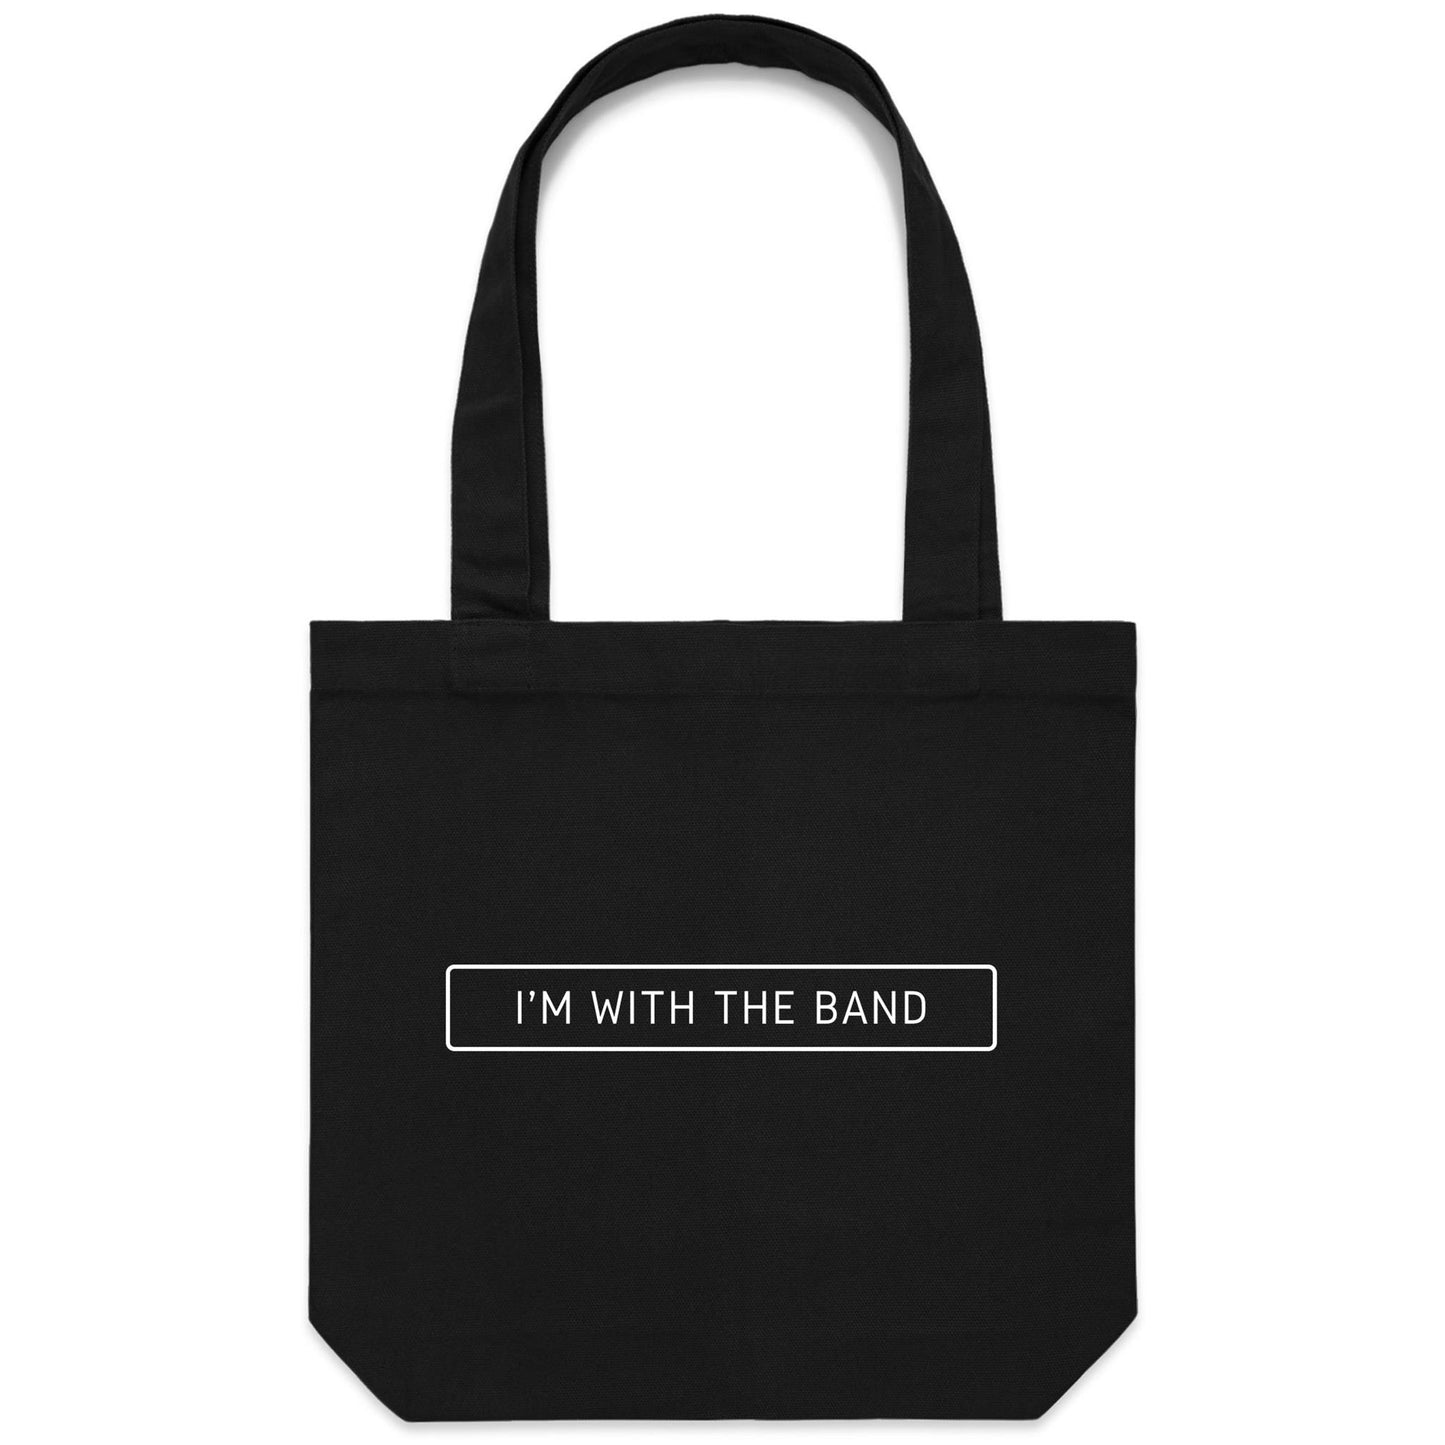 I'm With The Band - Canvas Tote Bag Default Title Tote Bag Music